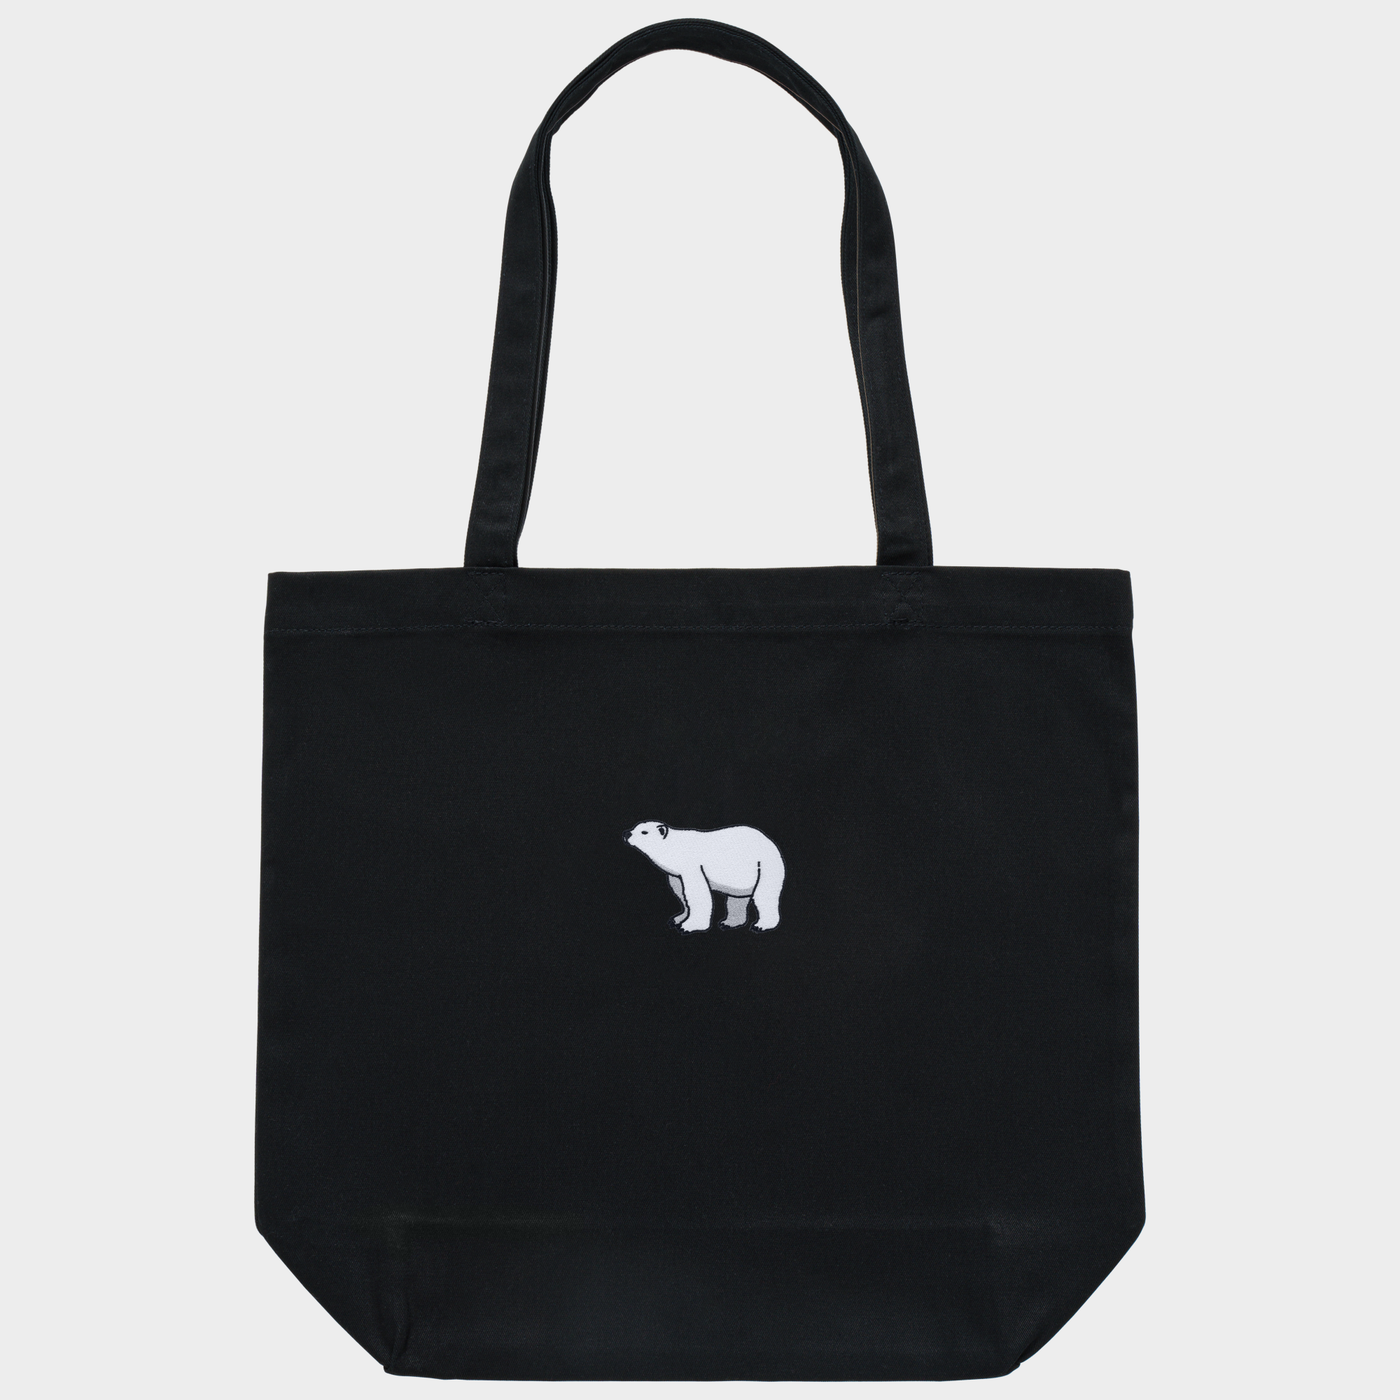 Bobby's Planet Embroidered Polar Bear Tote Bag from Arctic Polar Animals Collection in Black Color#color_black